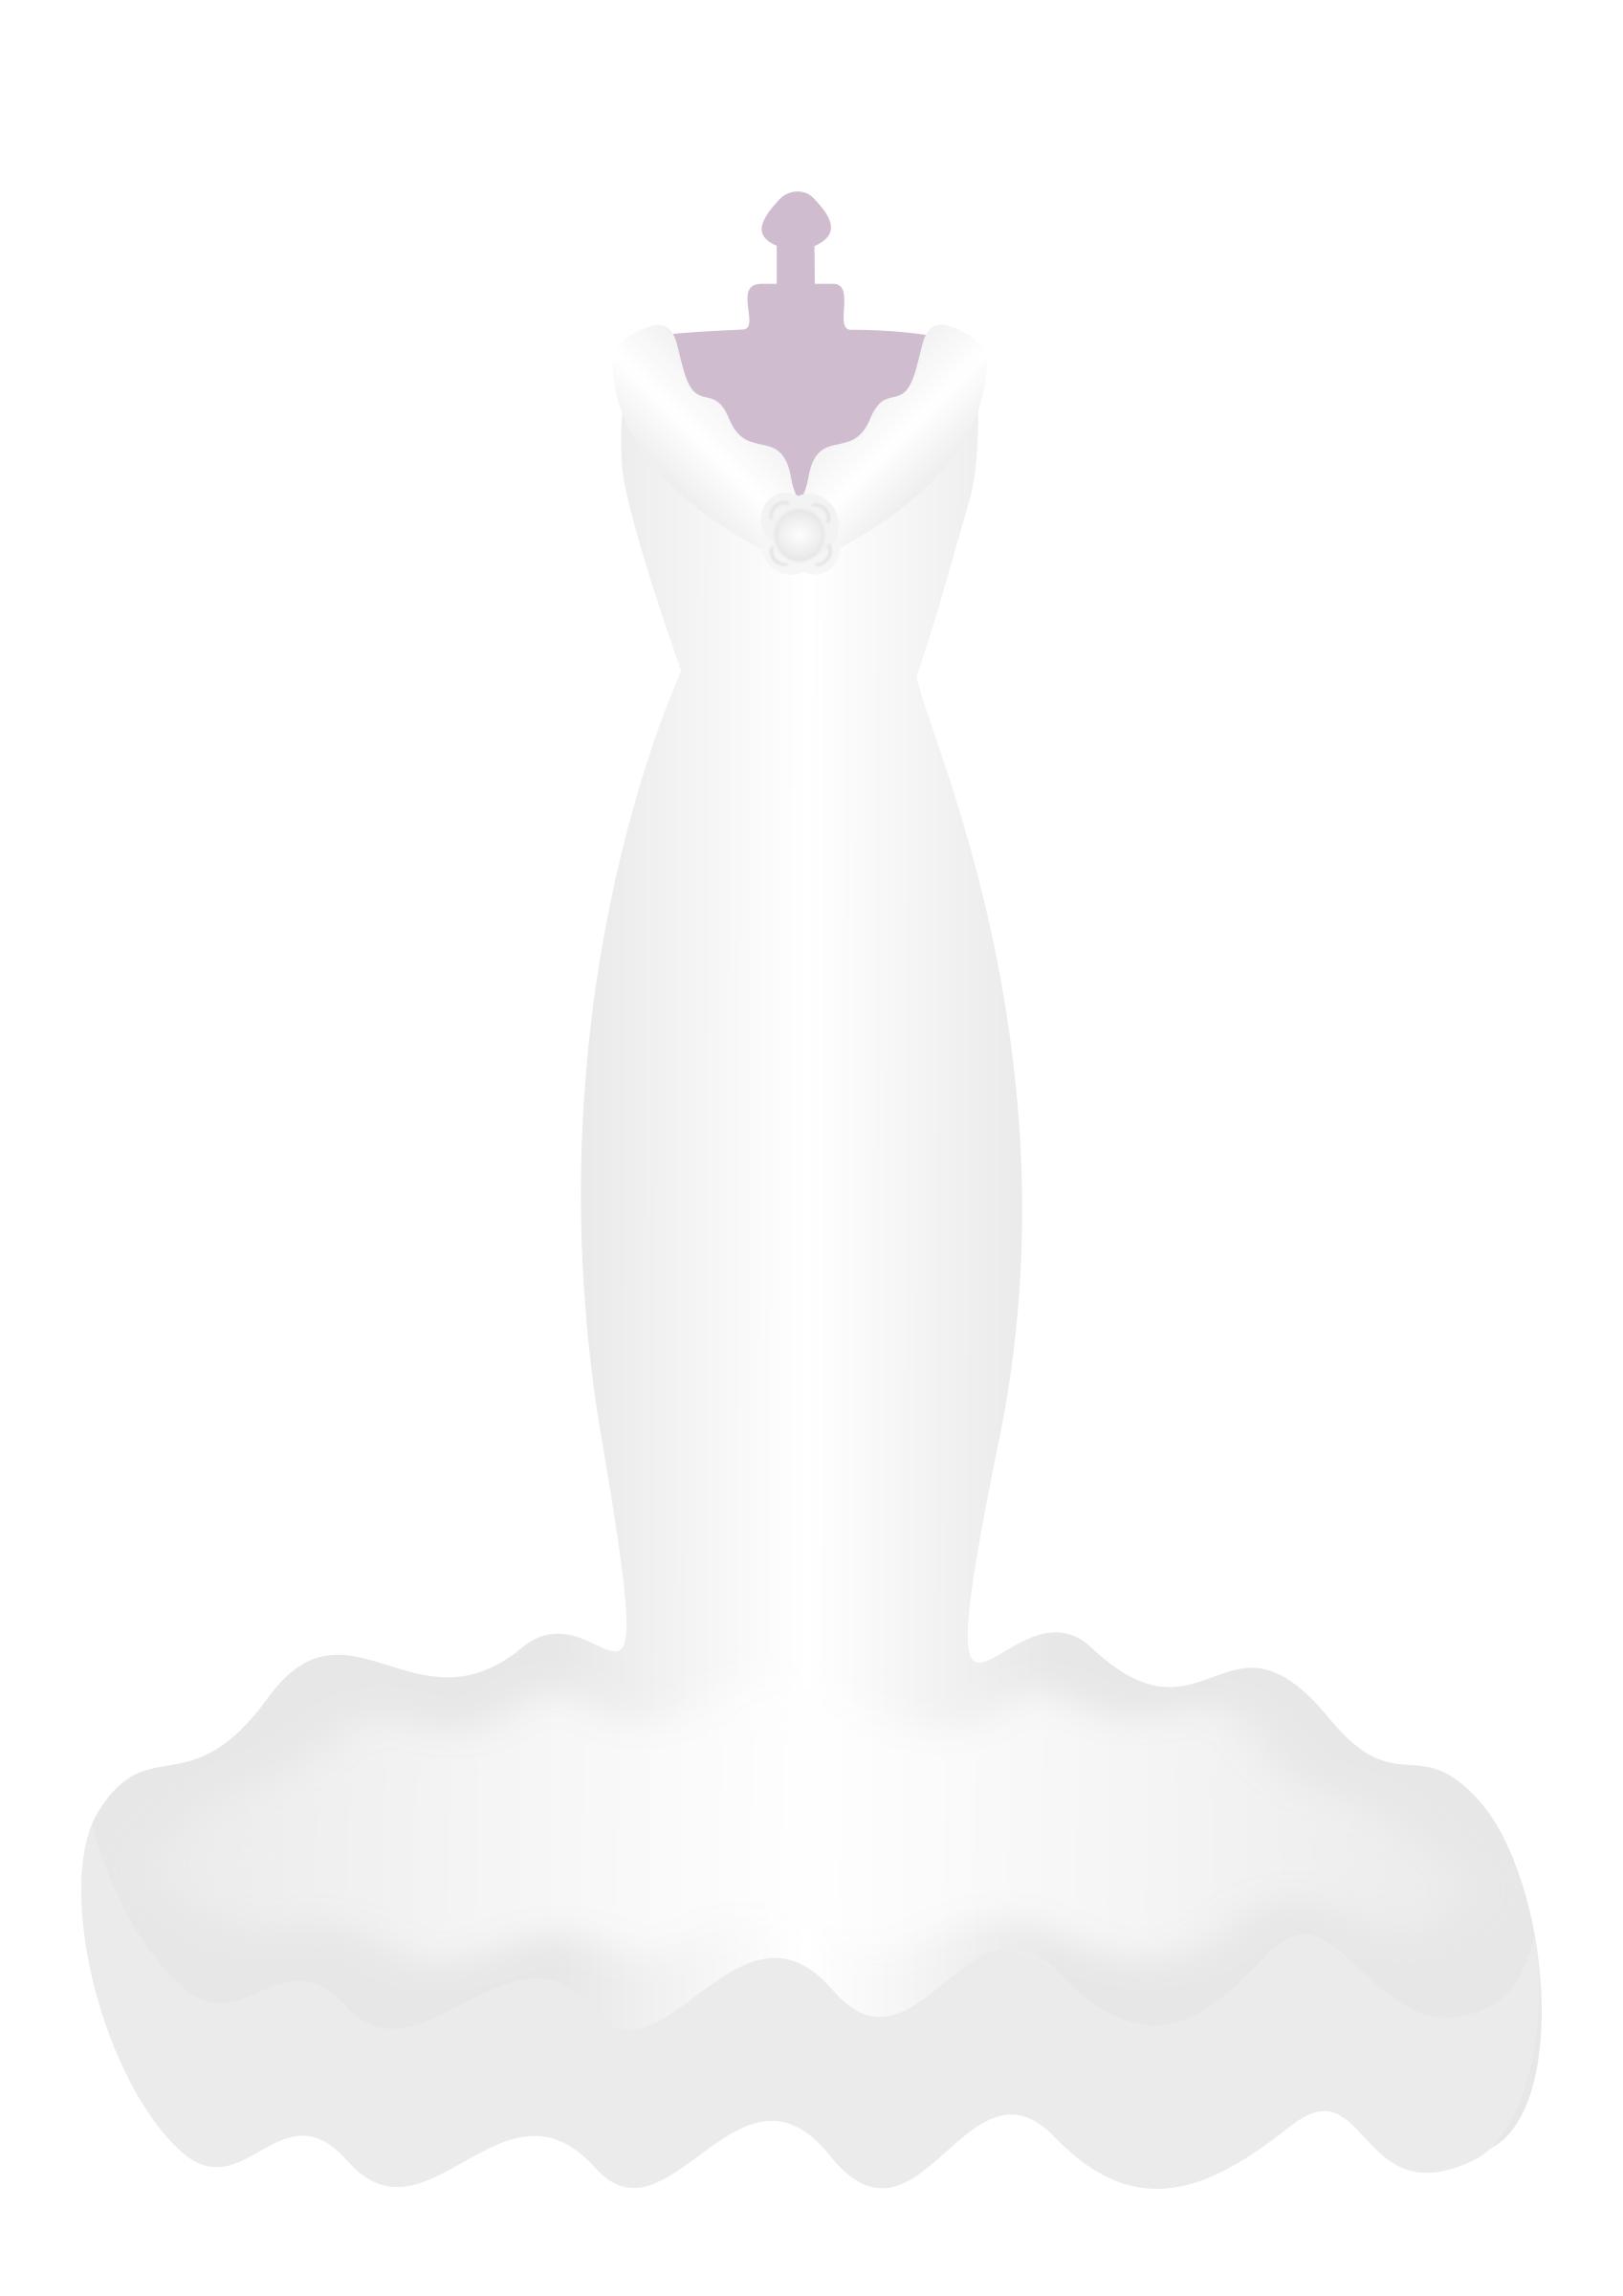 Wedding Dress 2 PNG icons